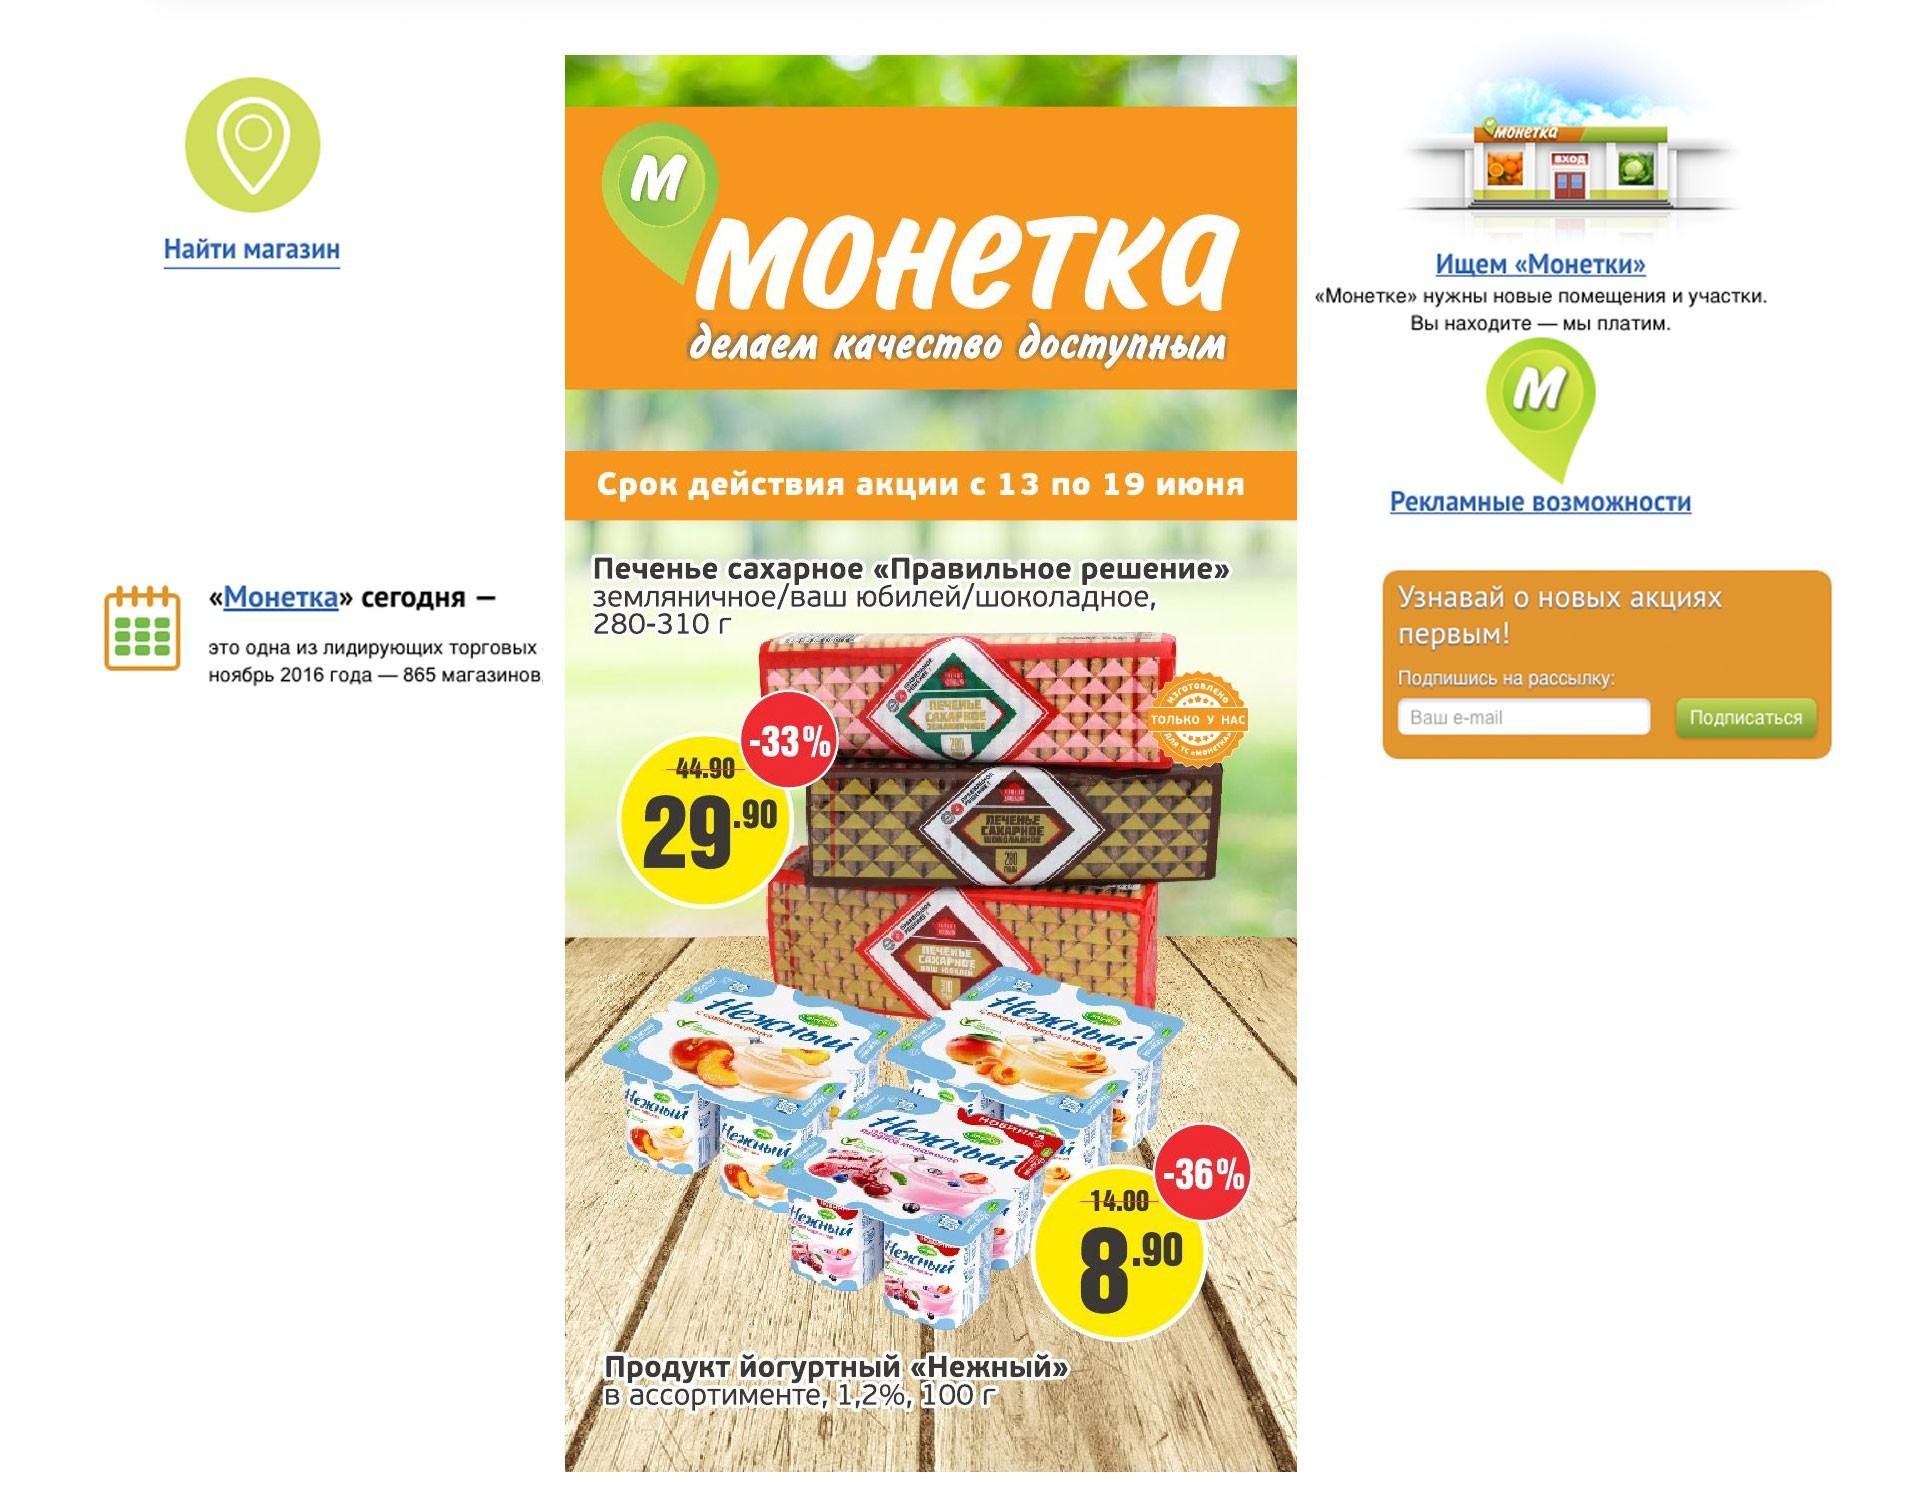 On-line branding and communications with new Monetka logo